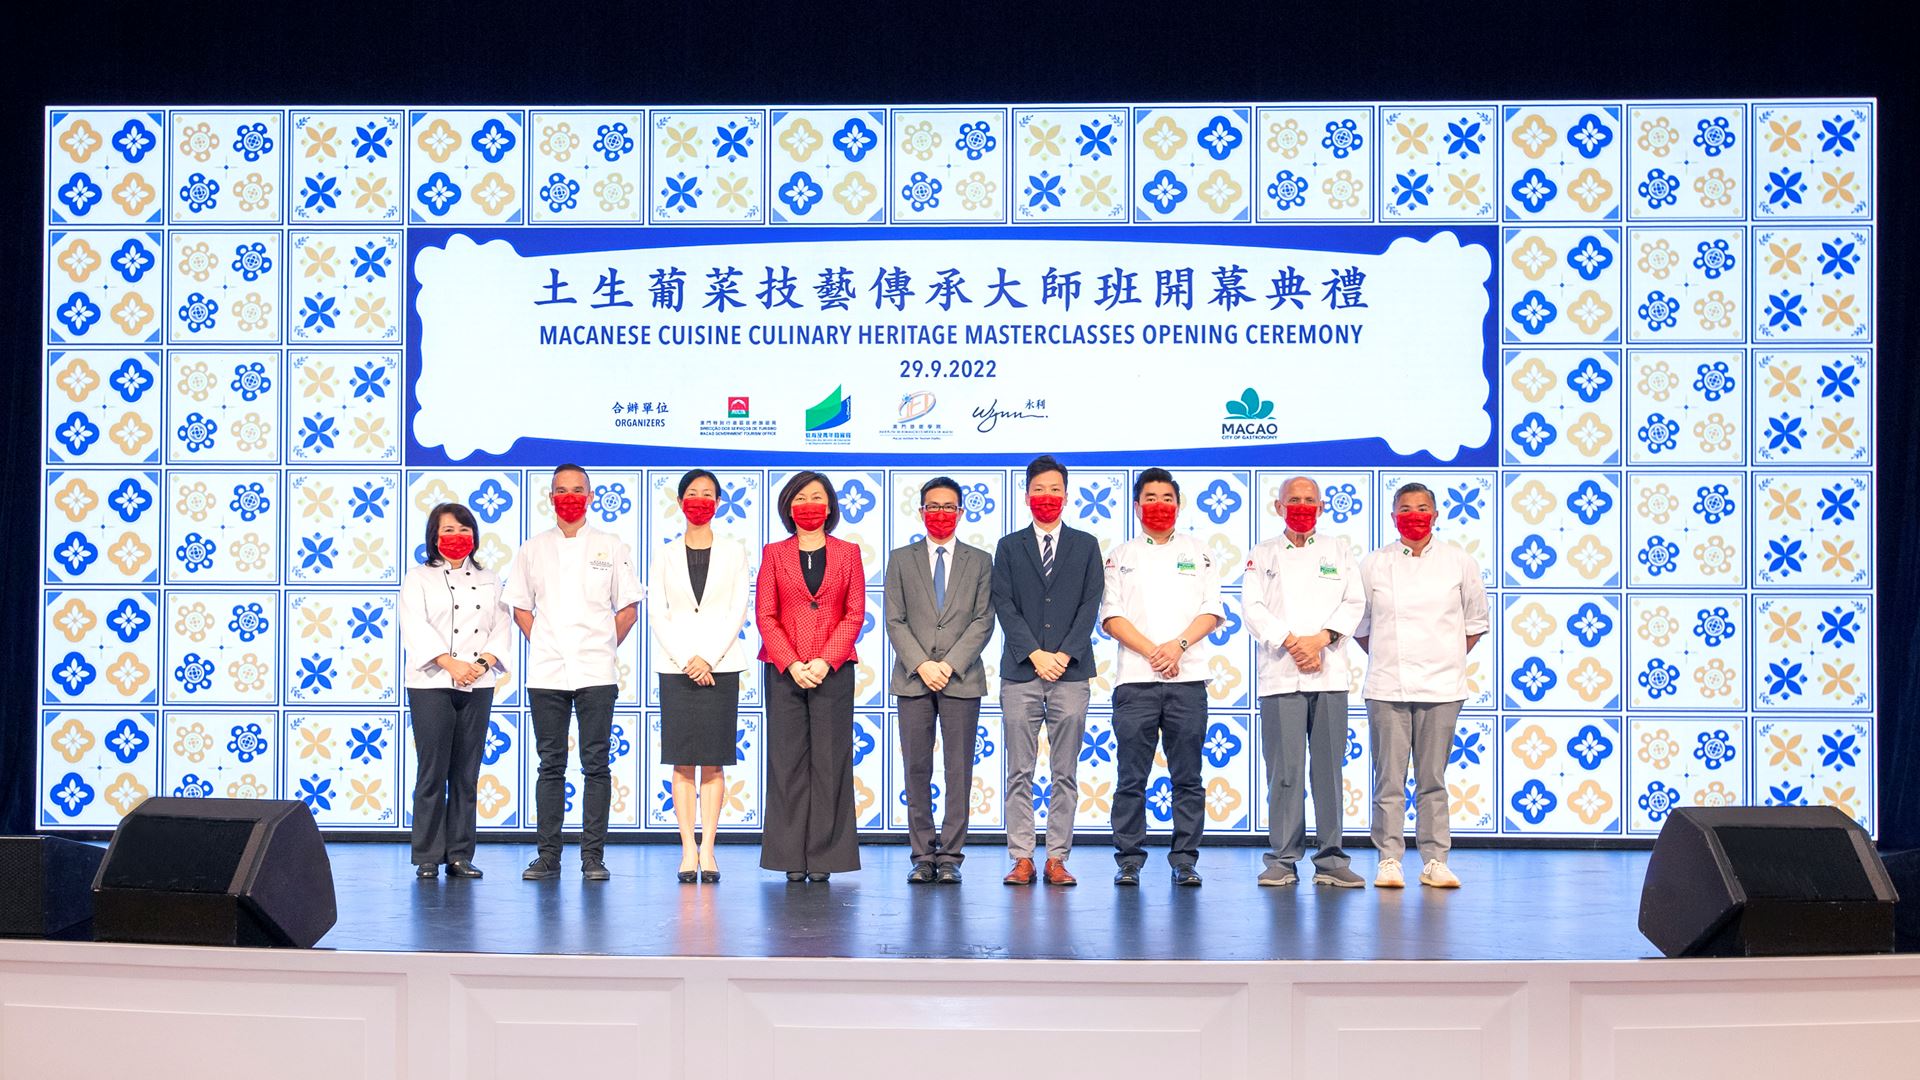 Officiating guests attended the opening ceremony of the Macanese Cuisine  Culinary Heritage Masterclasses